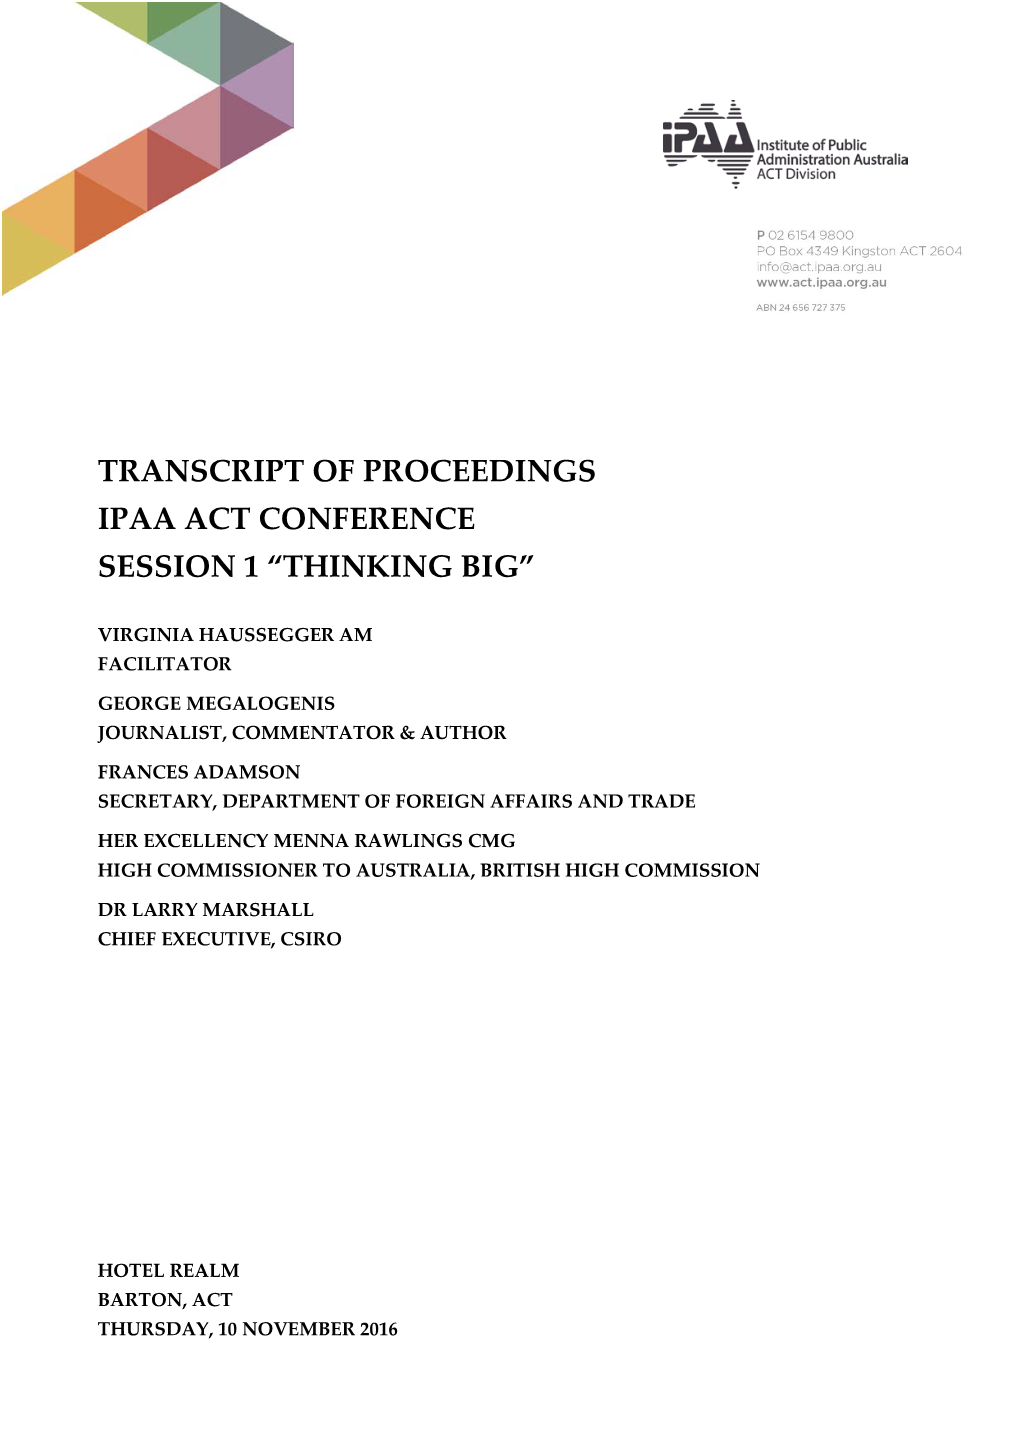 Transcript of Proceedings Ipaa Act Conference Session 1 “Thinking Big”